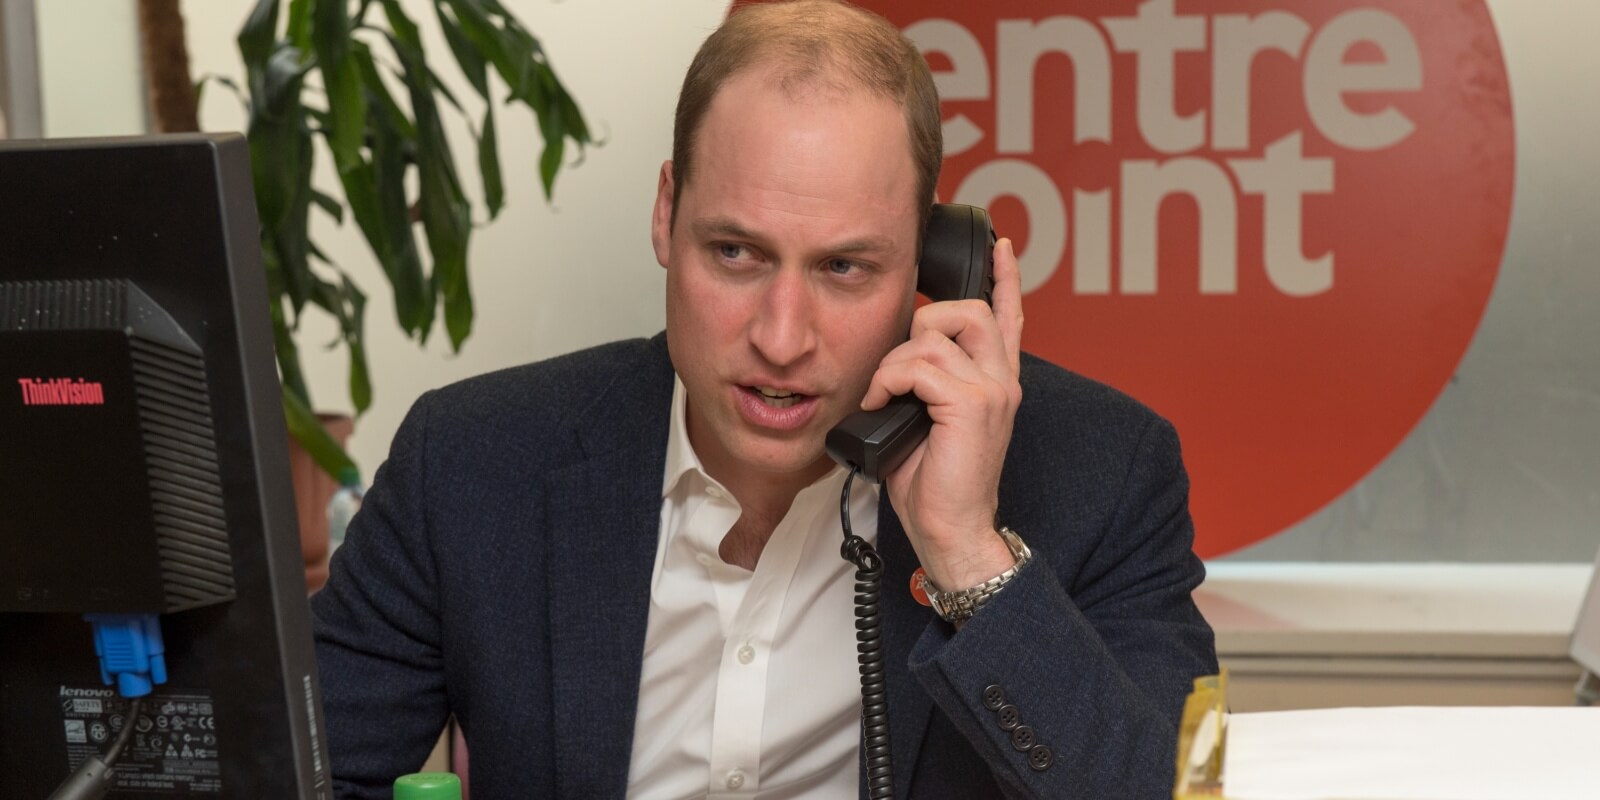 Prince Willaim, Duke of Cambridge officially launched the Centrepoint Helpline in London on February 13, 2017, in London, England.